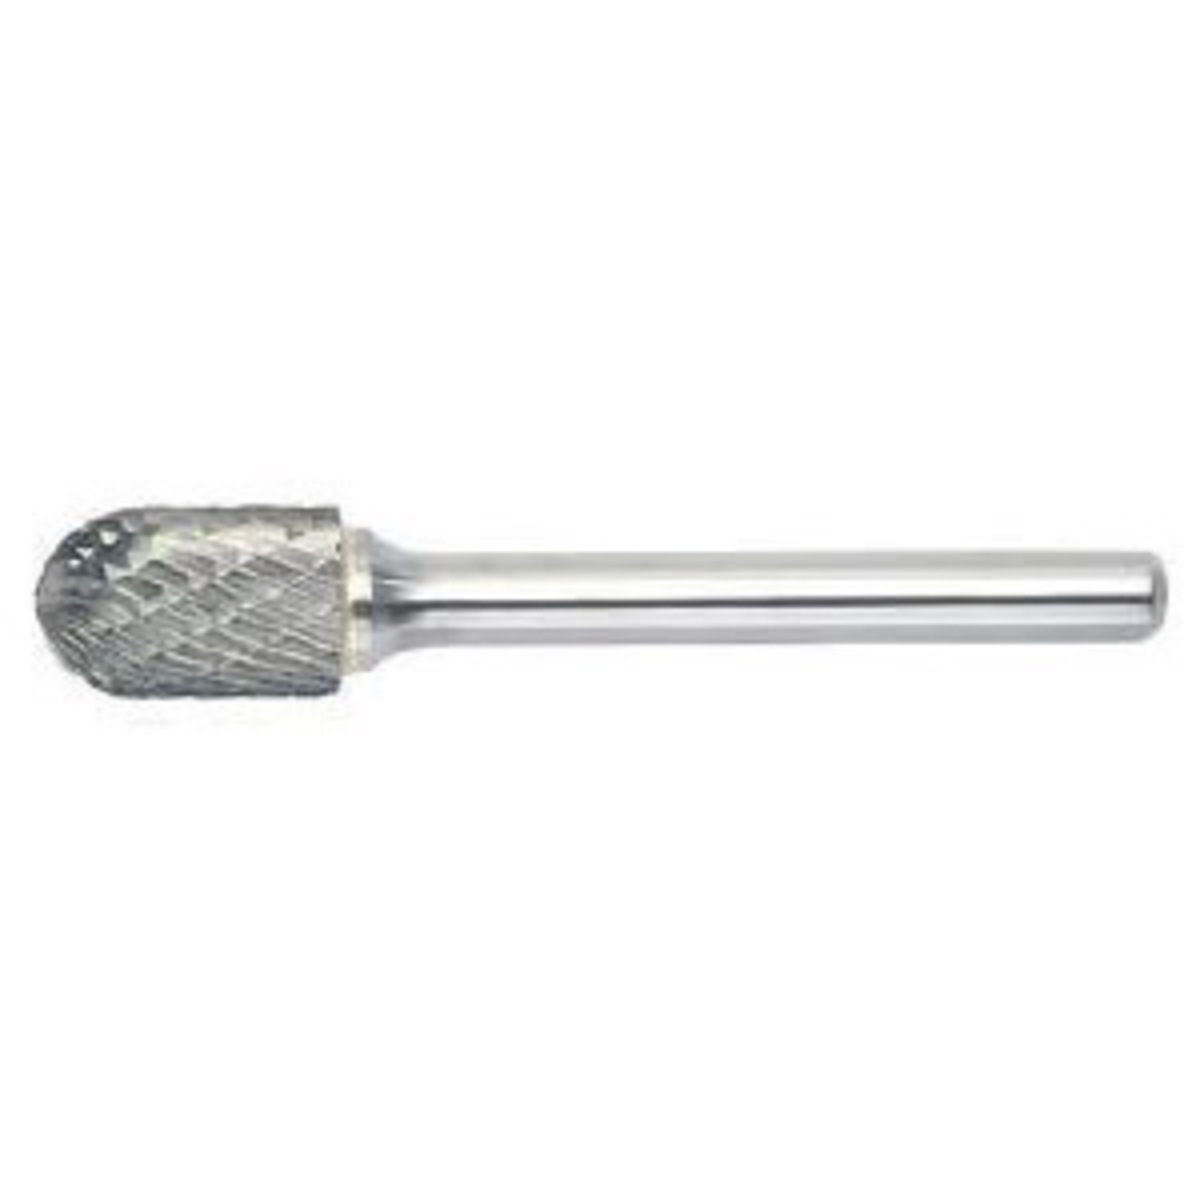 SC-52 Carbide Burr Cylindrical Ball Nose Double Cut 1/8 x 5/32 in.